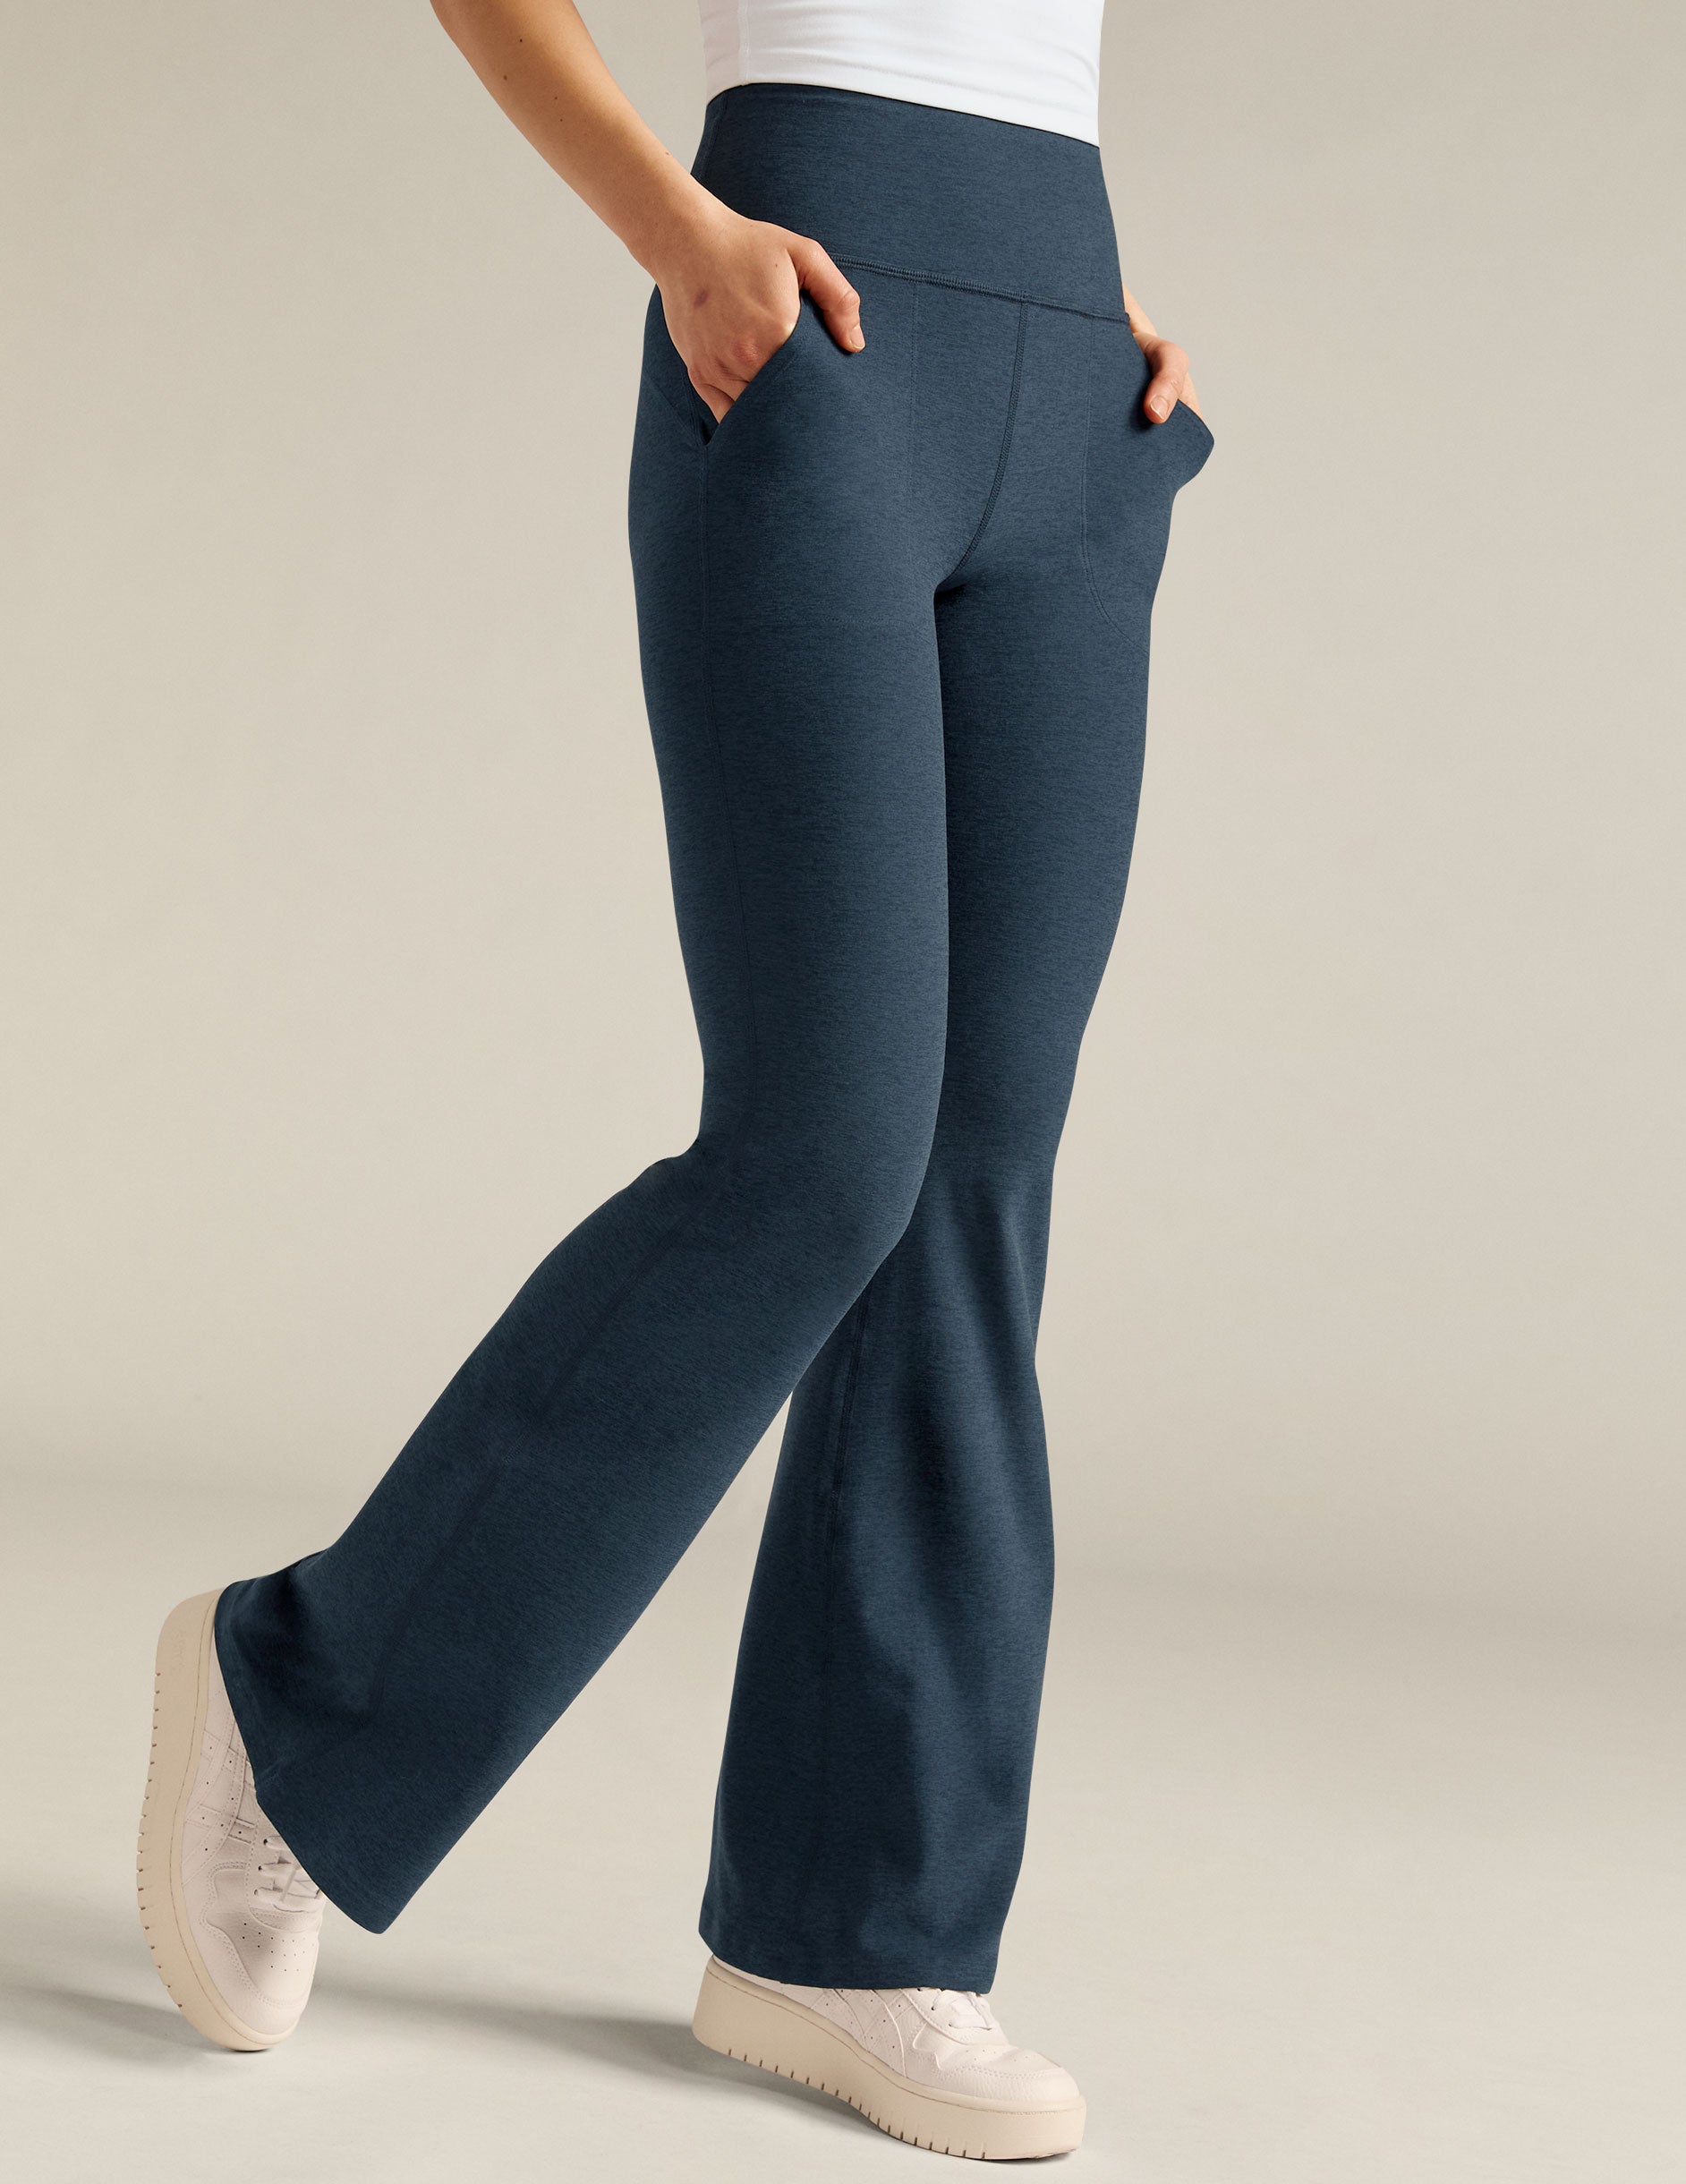 Navy Blue High Waist Pants for Women, Blue Wide Leg Pants for Women, Women's  Office Pants High Rise, Womens Palazzo Pants Blue -  Norway